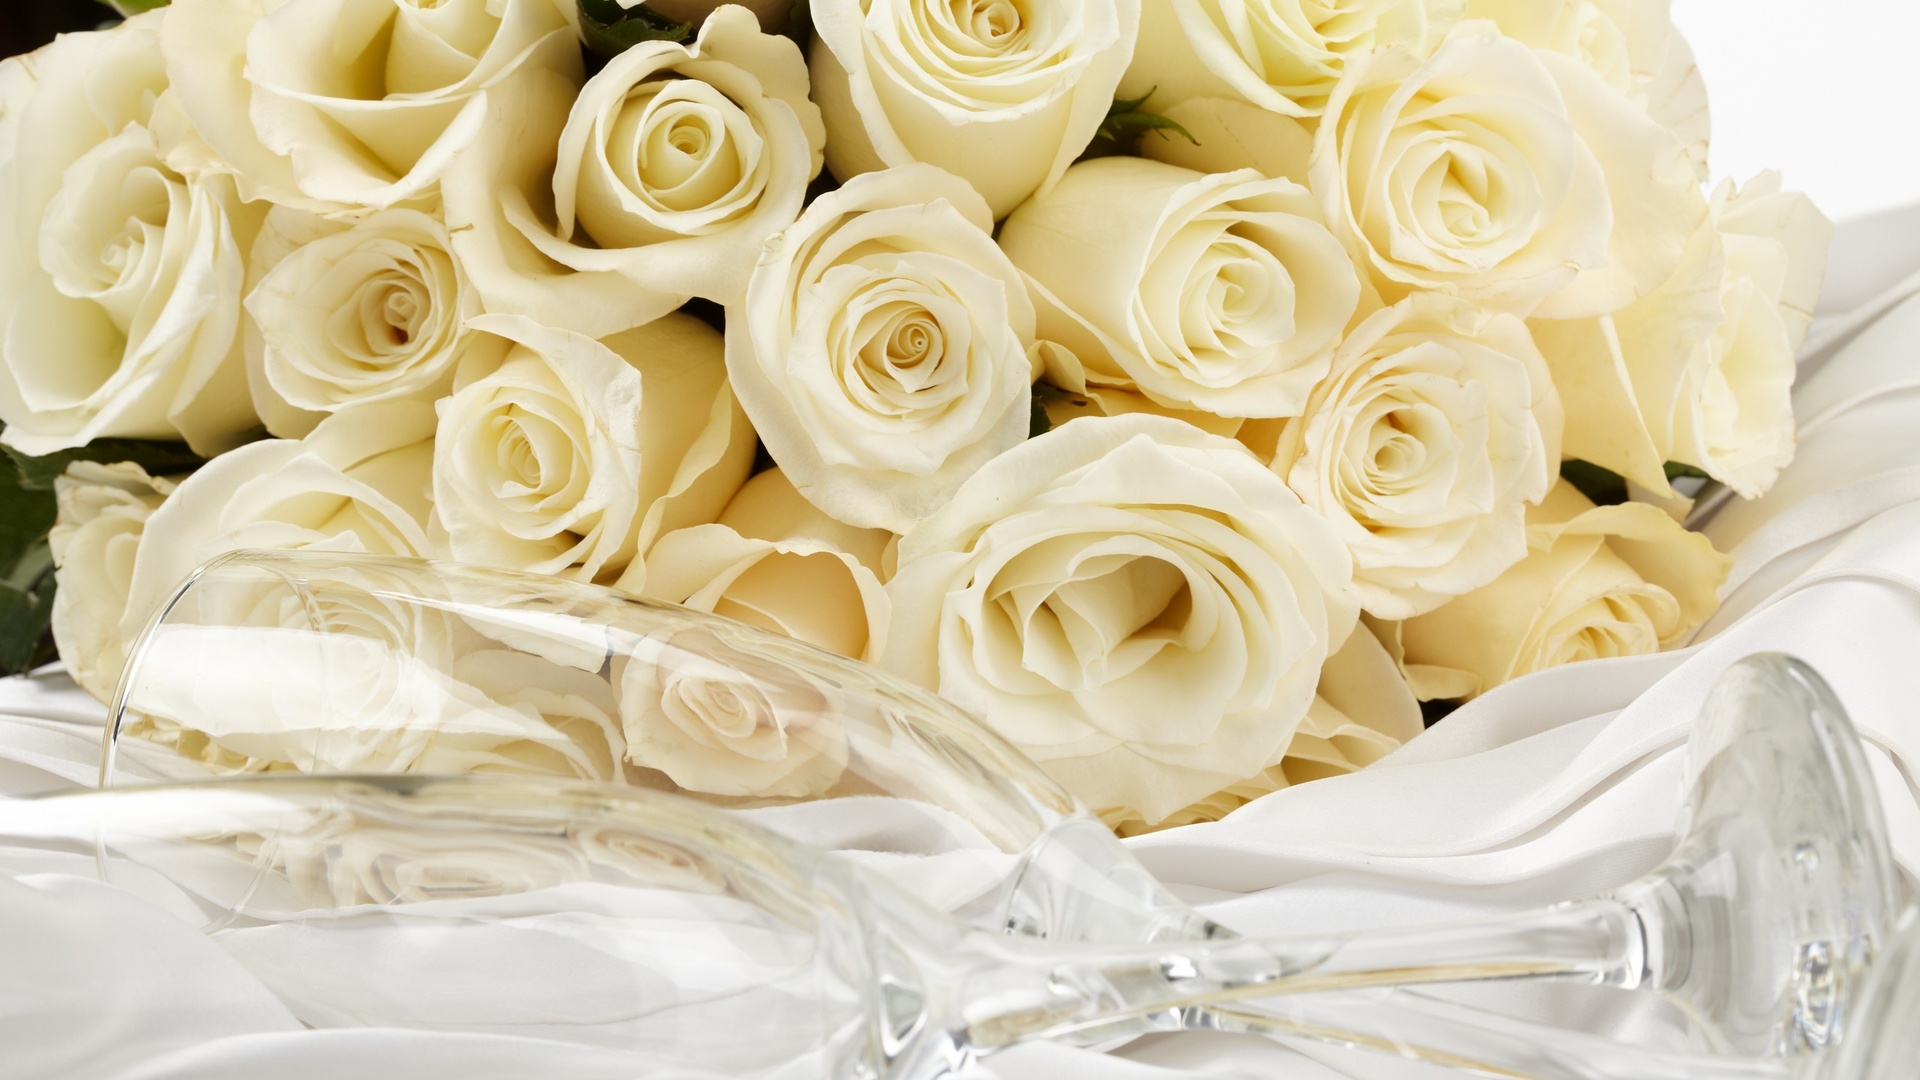 White Roses Flower - Wallpaper, High Definition, High Quality, Widescreen